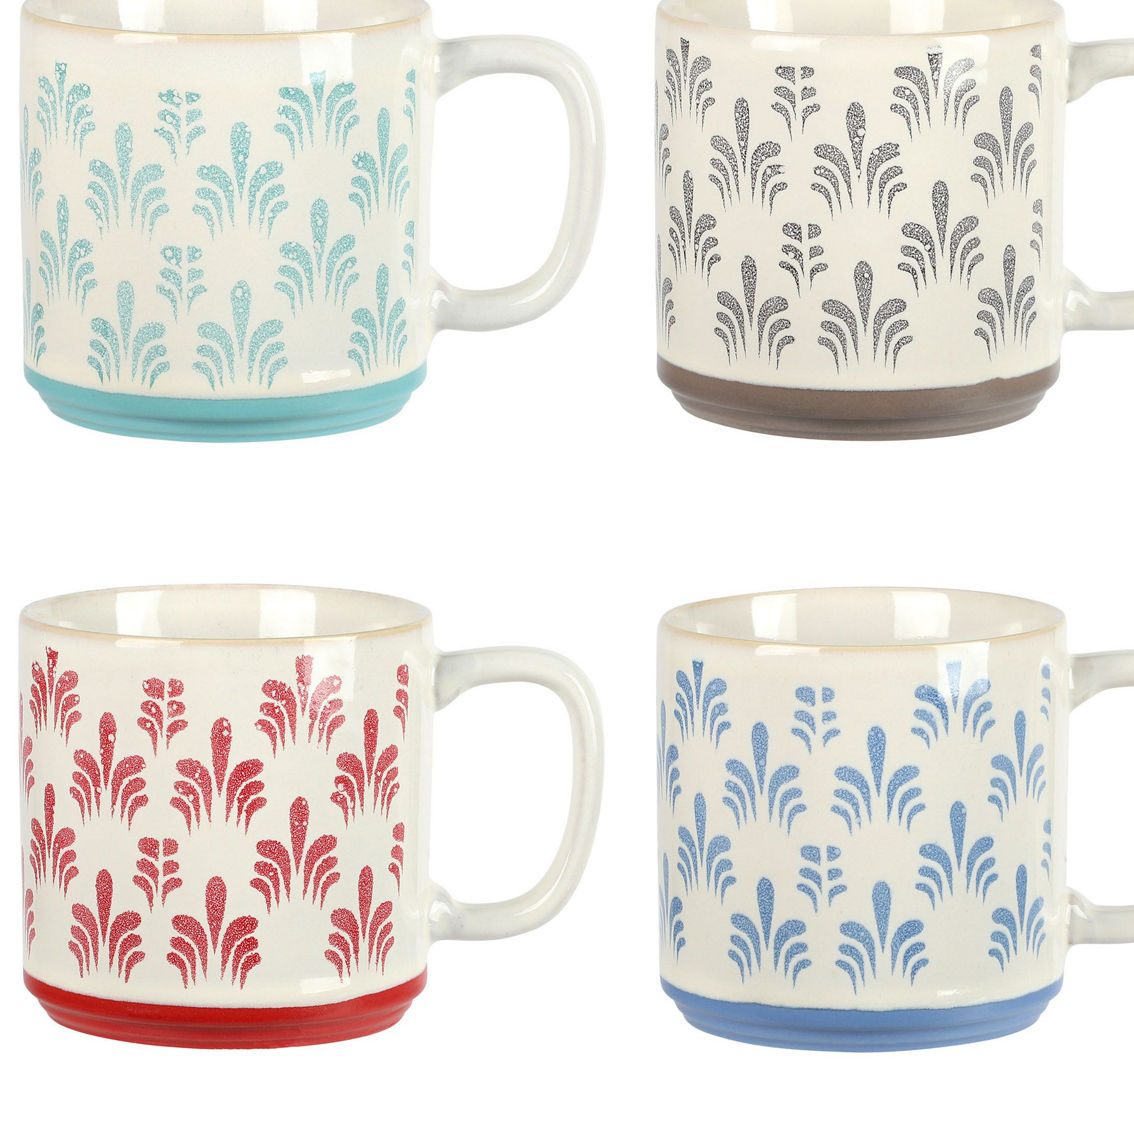 Gibson Home Morning Mist 4 Piece 18 Ounce Stoneware Mug Set in Assorted Colors - Image 3 of 5